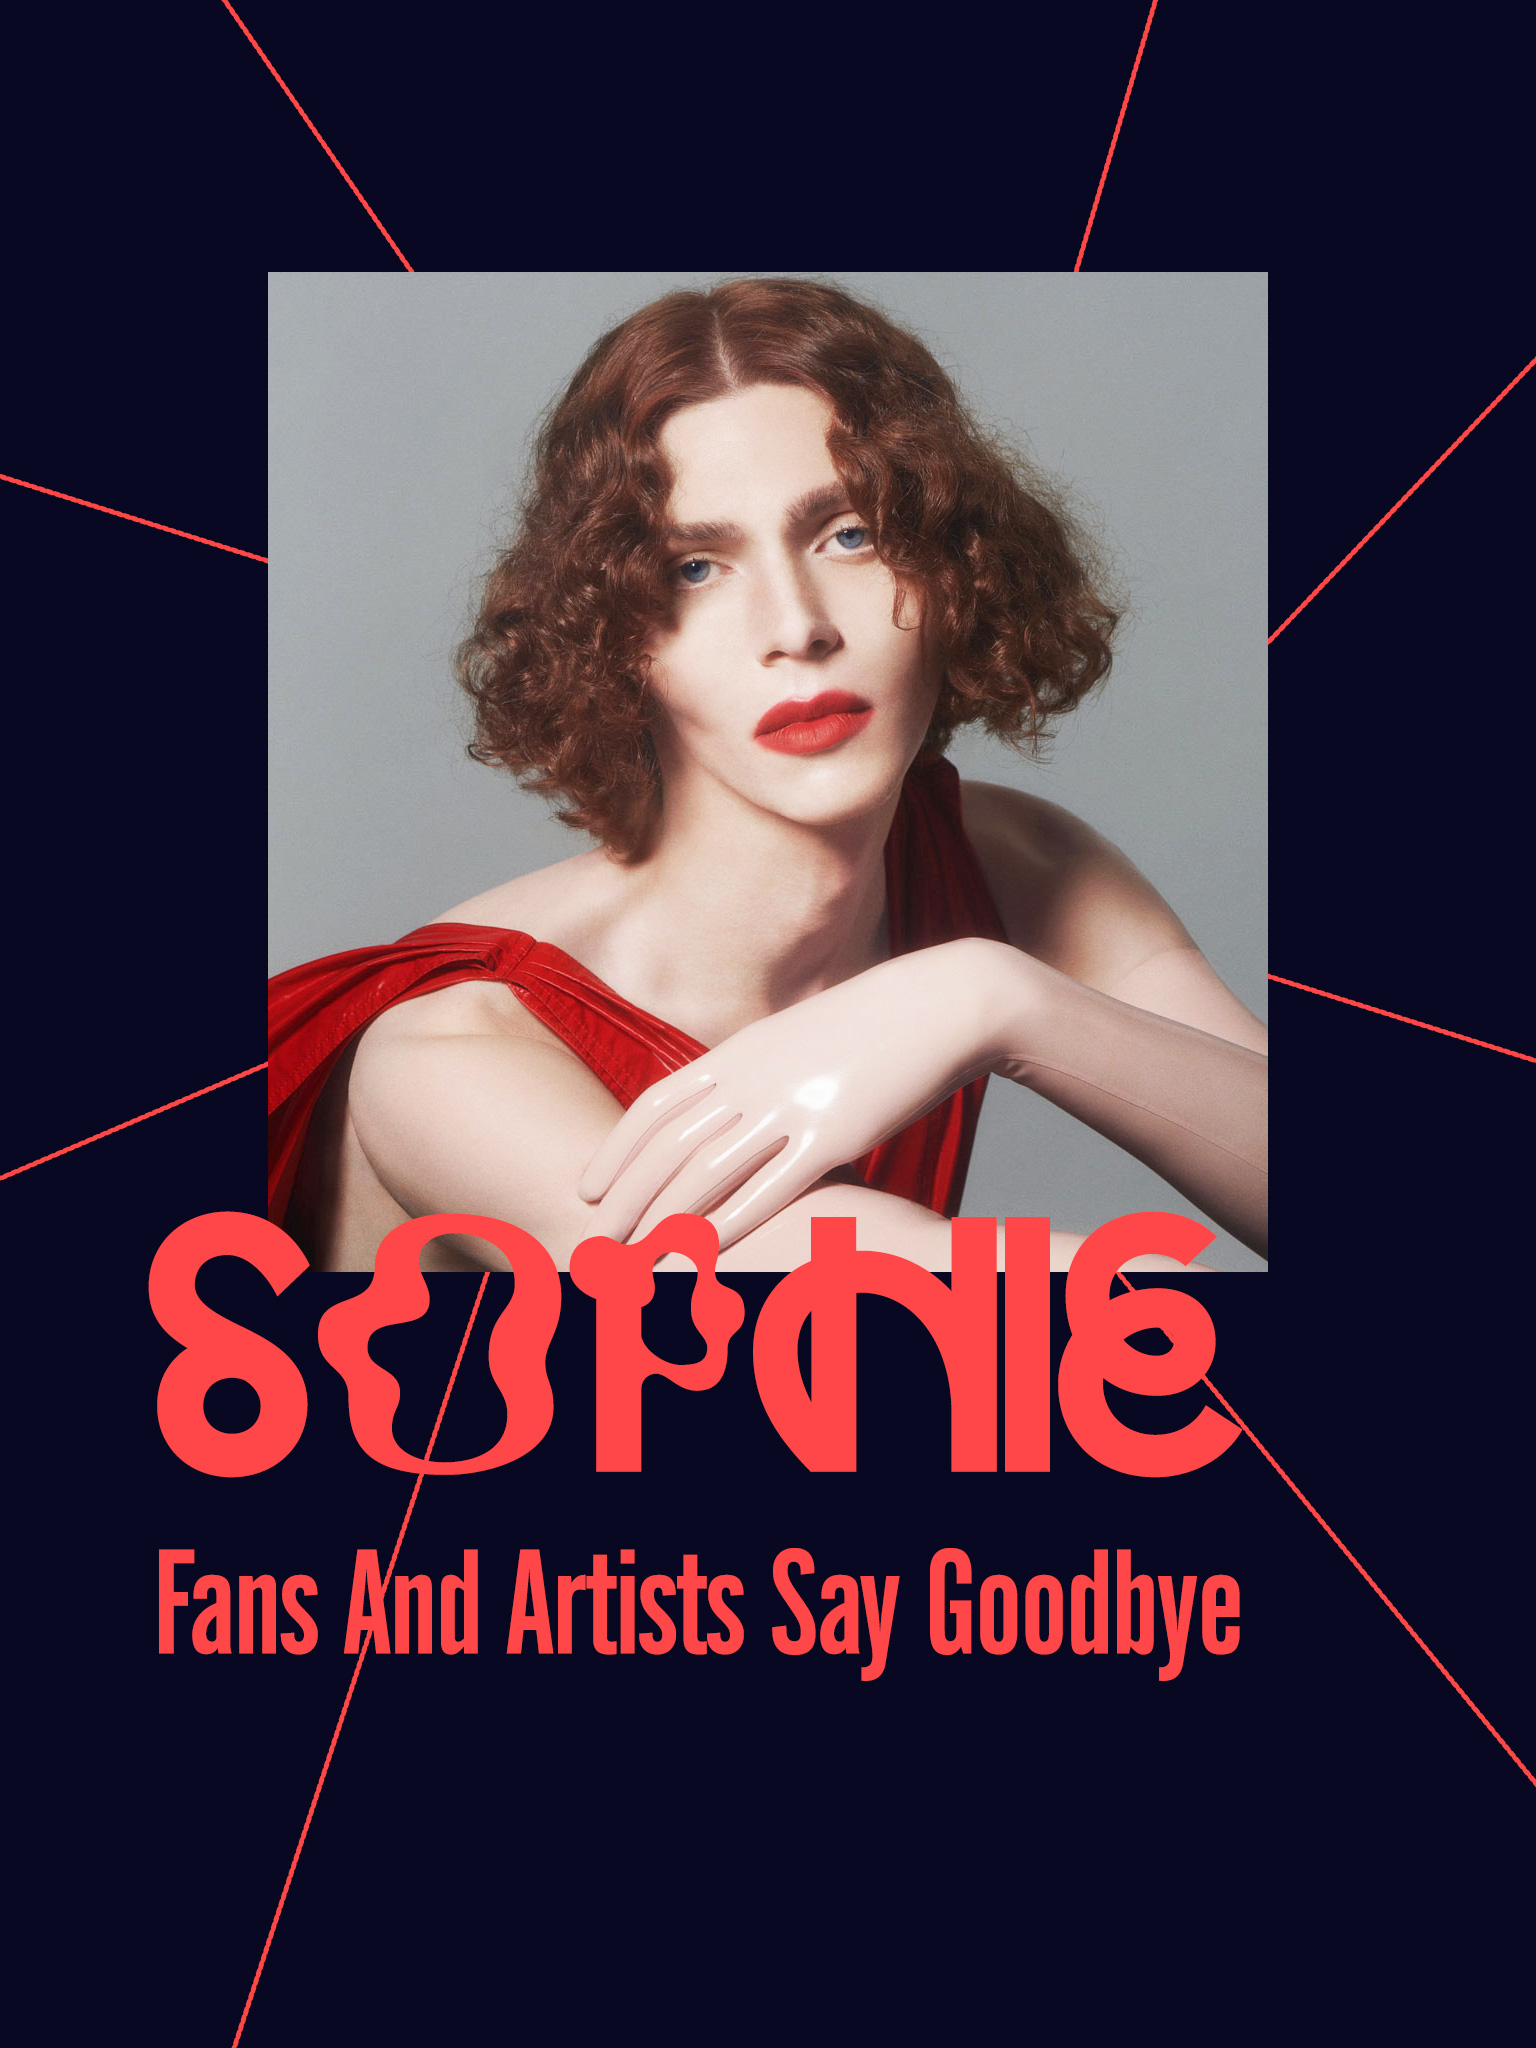 SOPHIE: Fans And Artists Say Goodbye